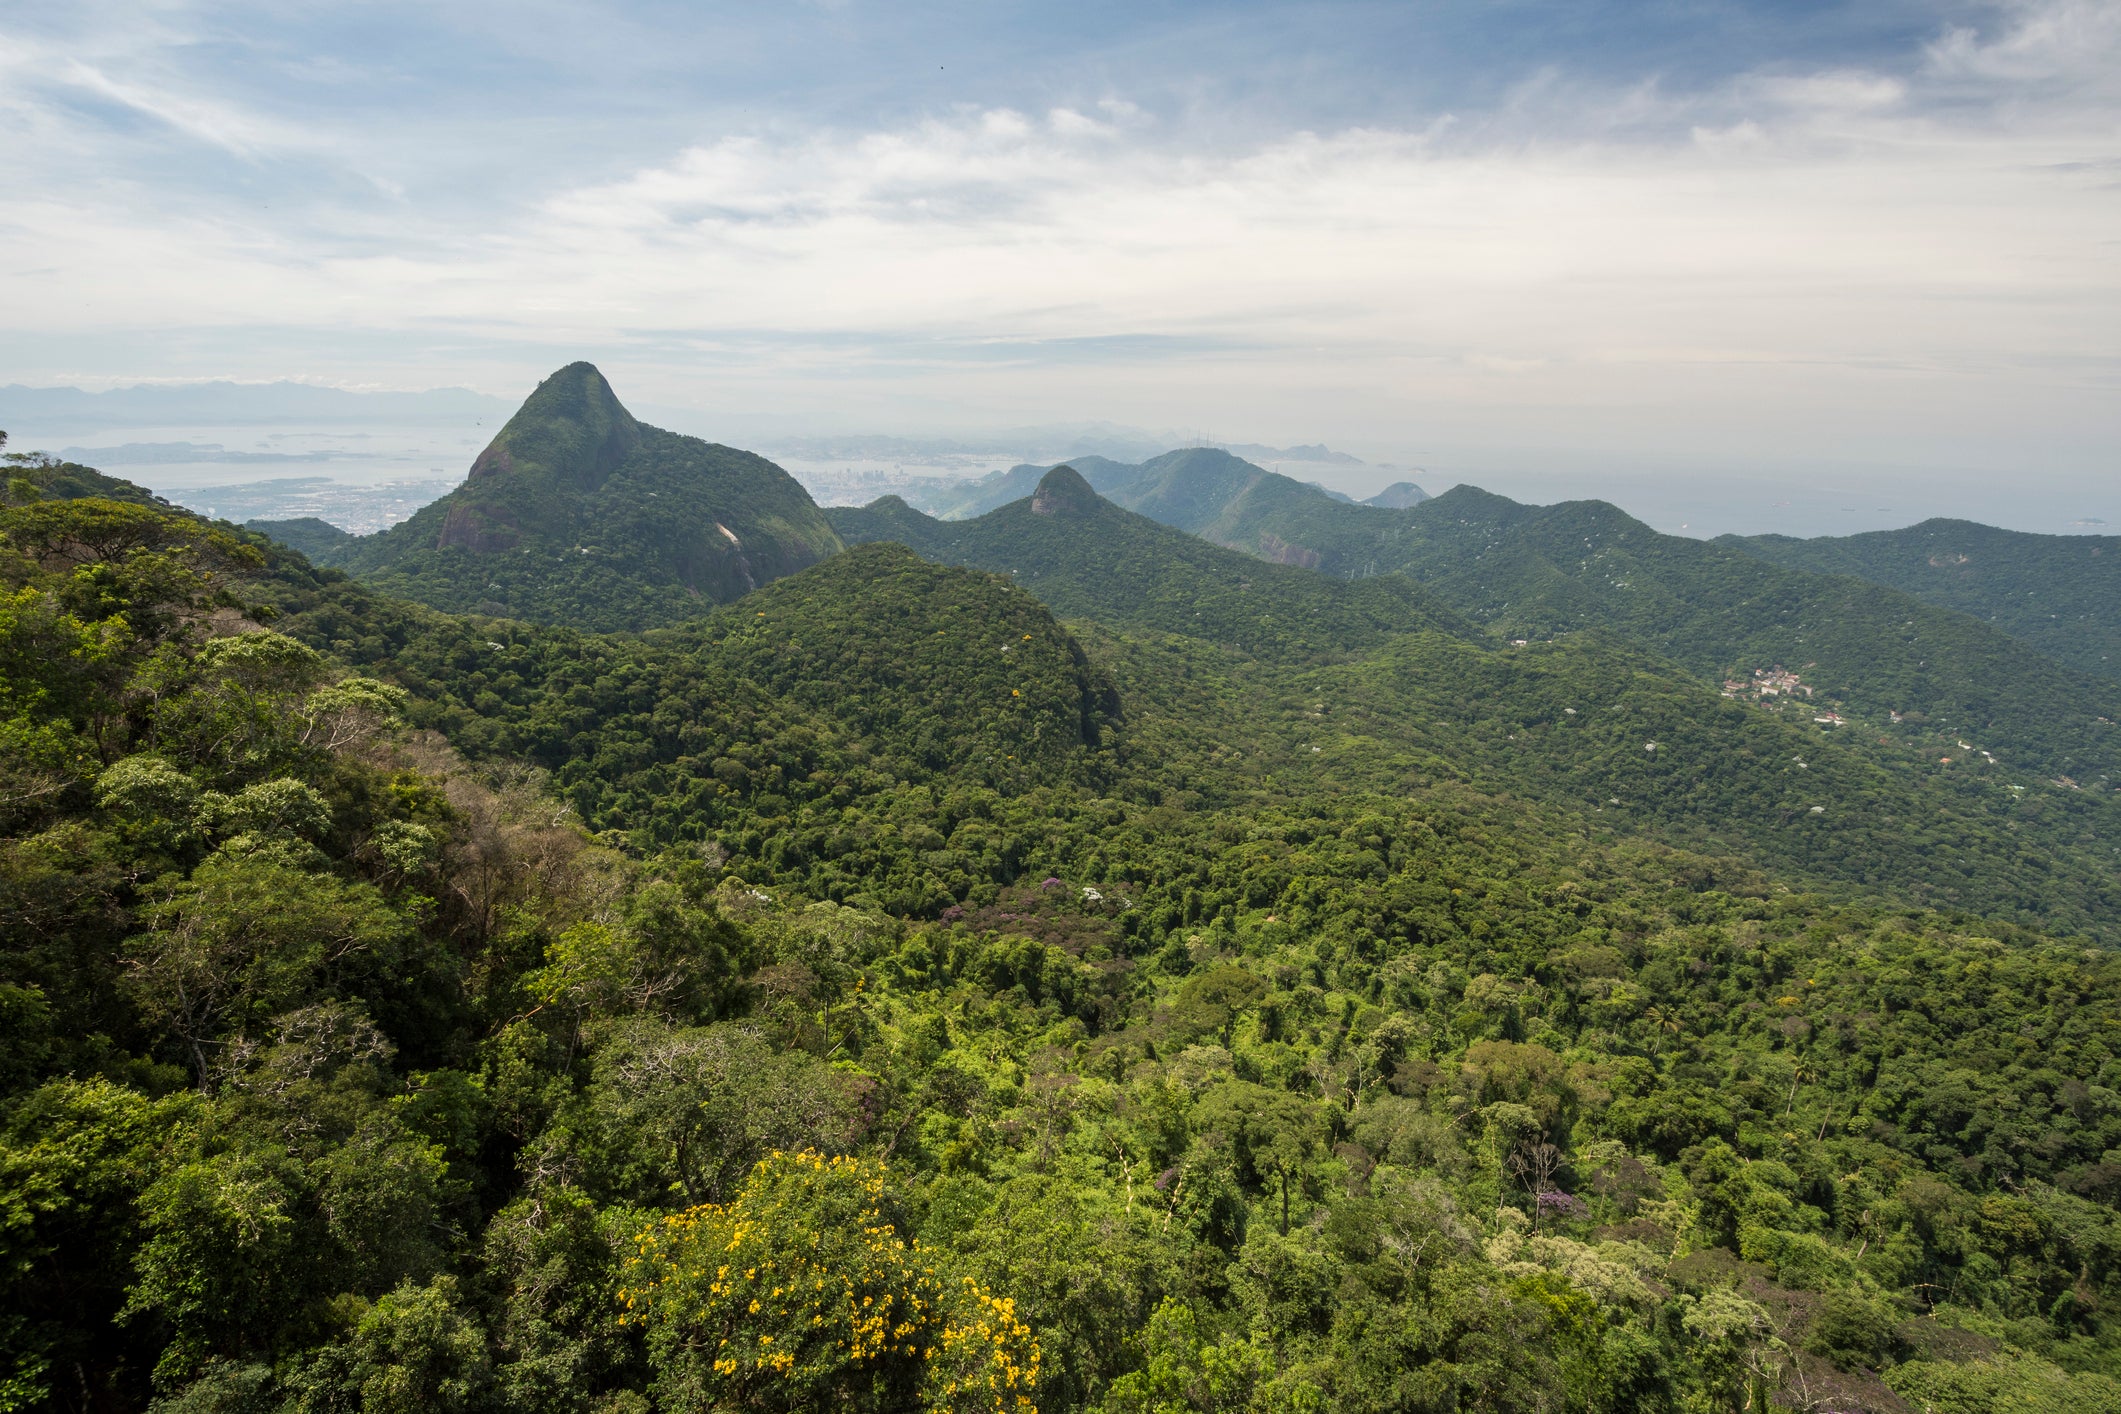 Scenery of forest and mountains, Tijuca Forest National Park, Rio de Janeiro, Brazil